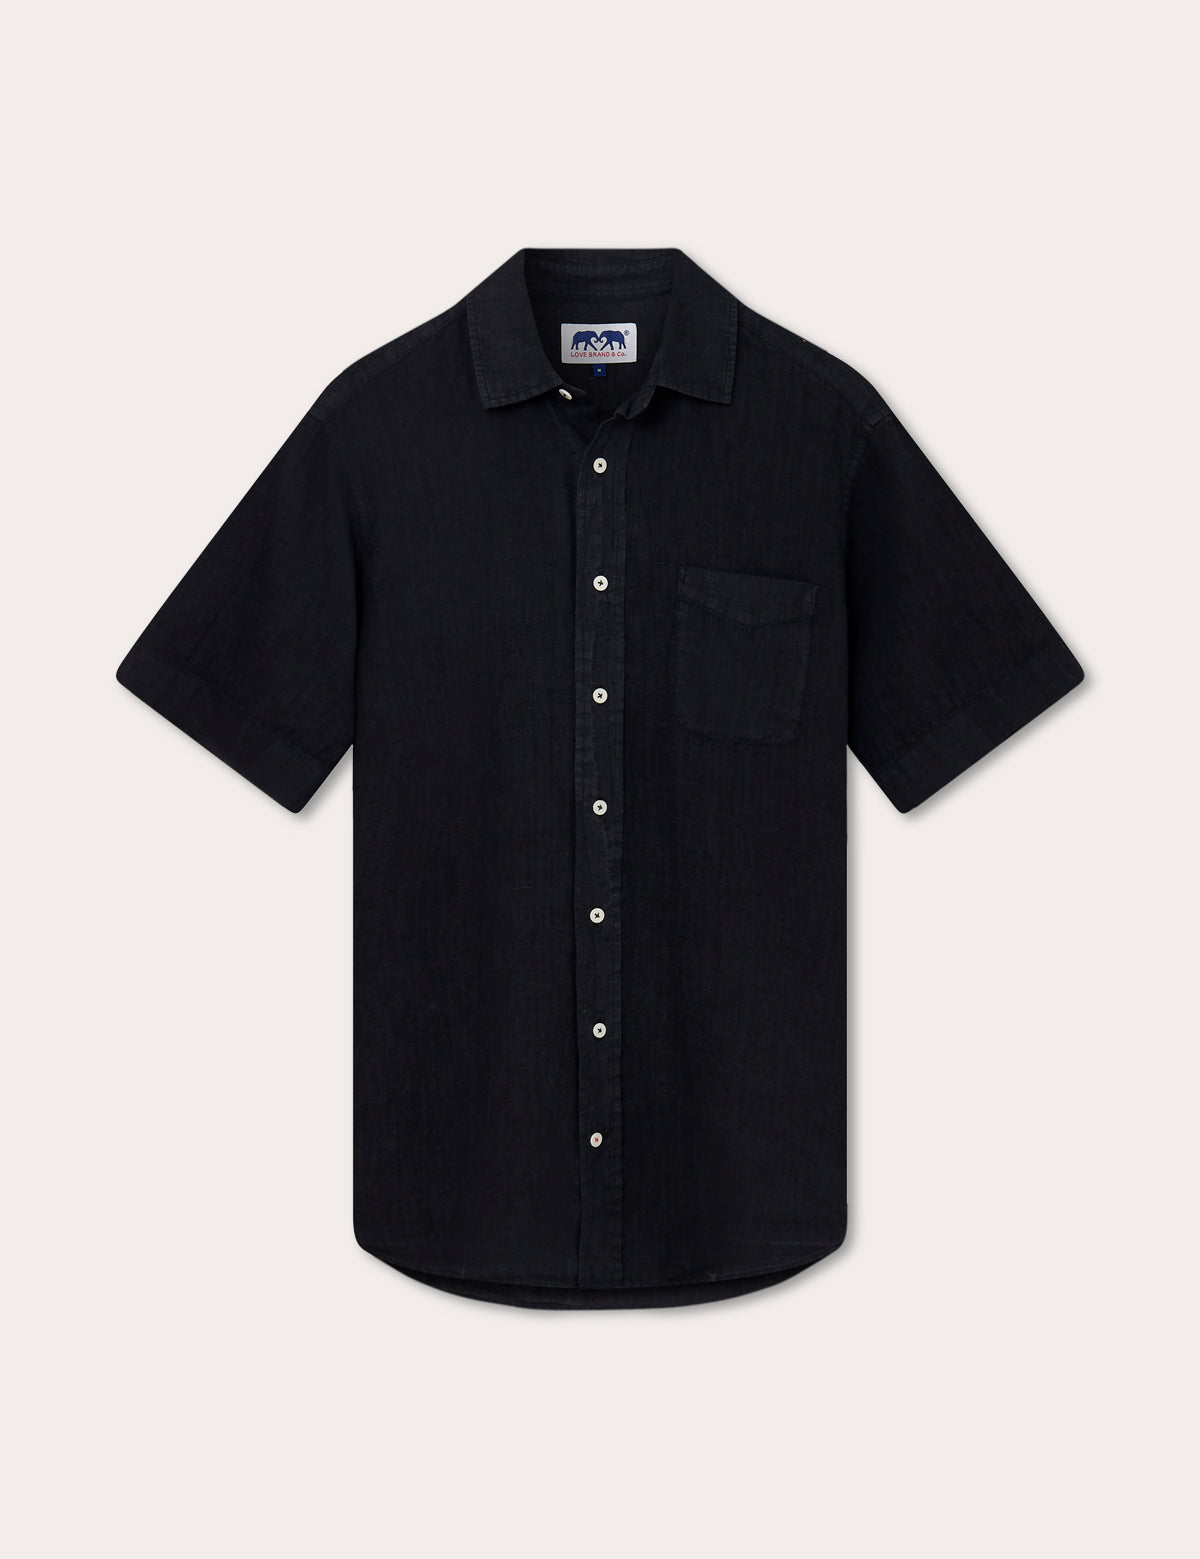 Men's Volcanic Black Manjack Linen Shirt, short sleeves, relaxed fit, crafted from 100% linen.